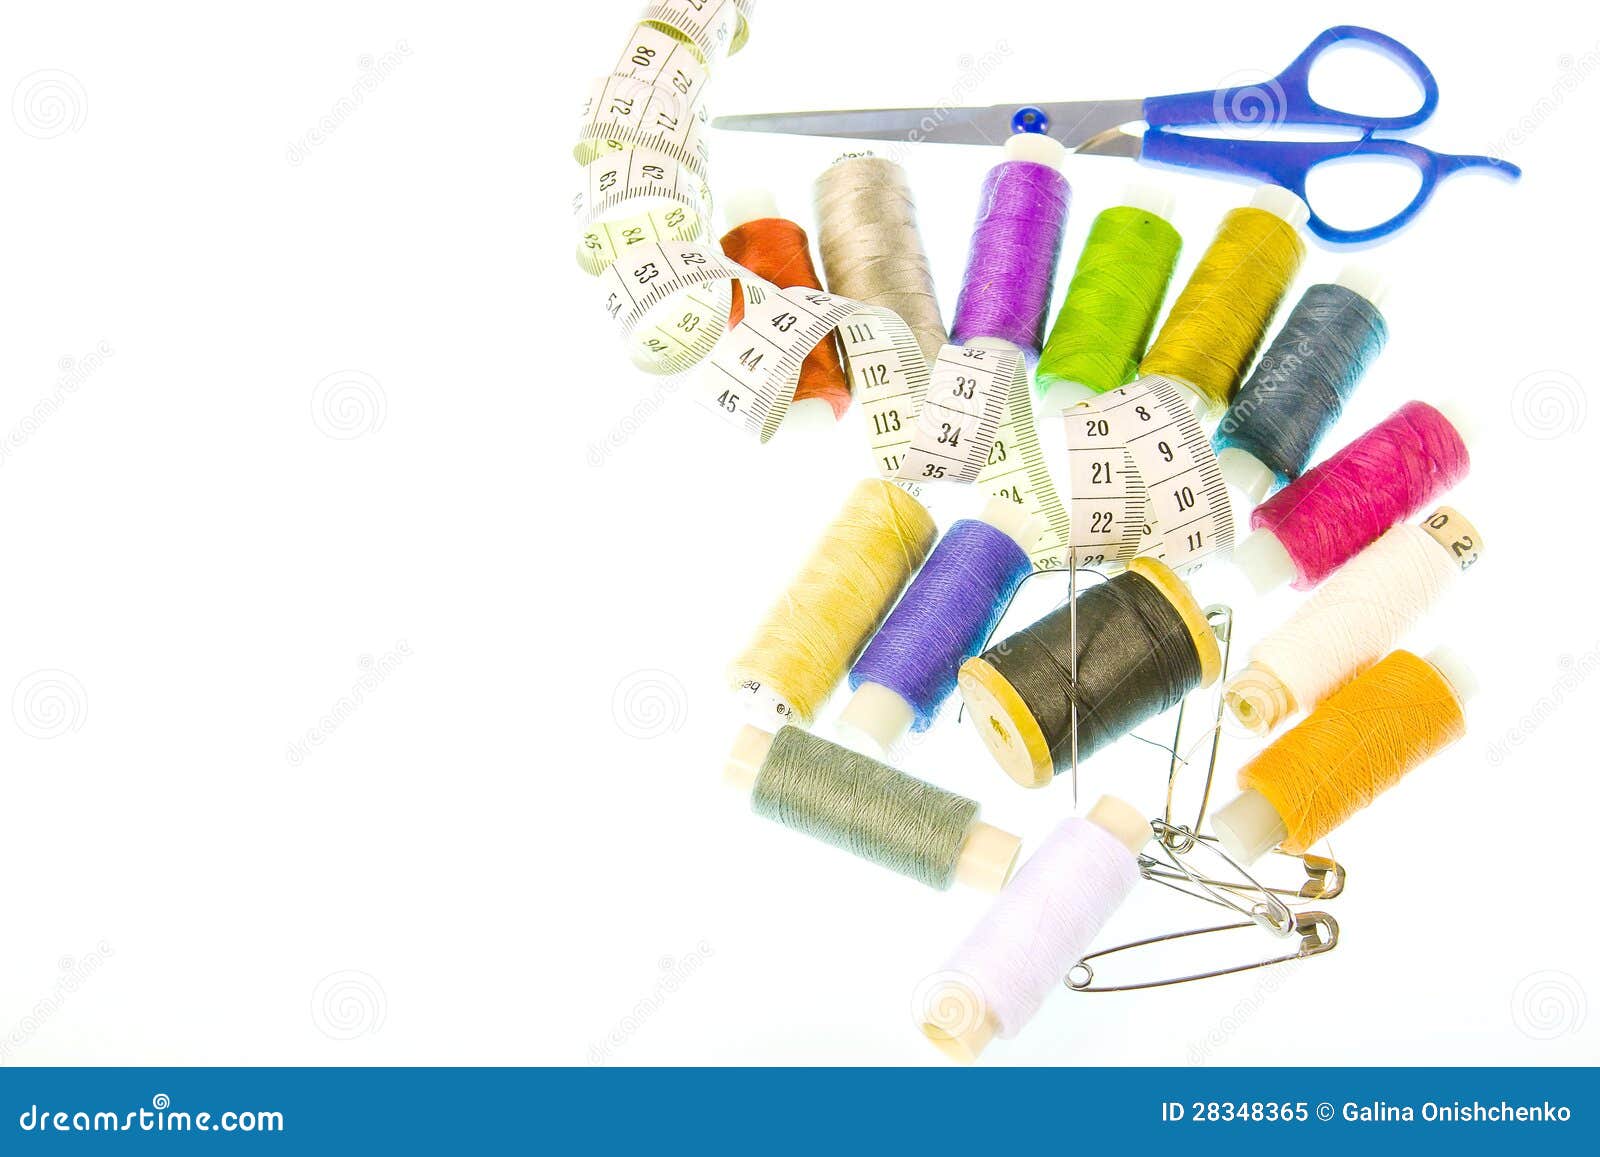 Bright Background from Sewing Belonging Stock Image - Image of plan ...